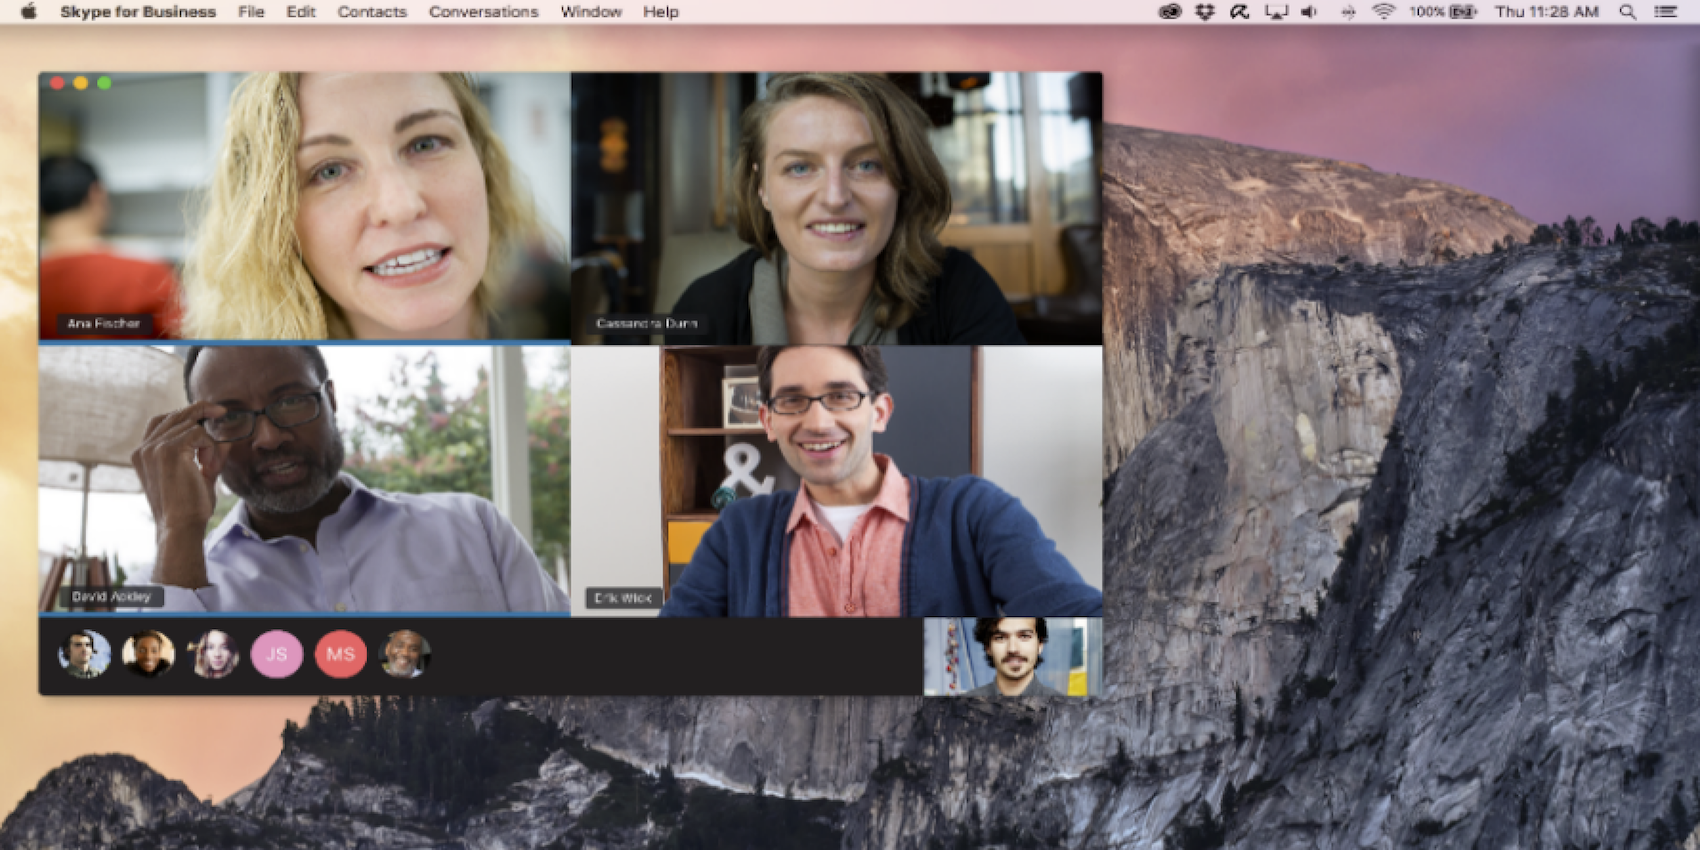 when will skype for business be available for mac